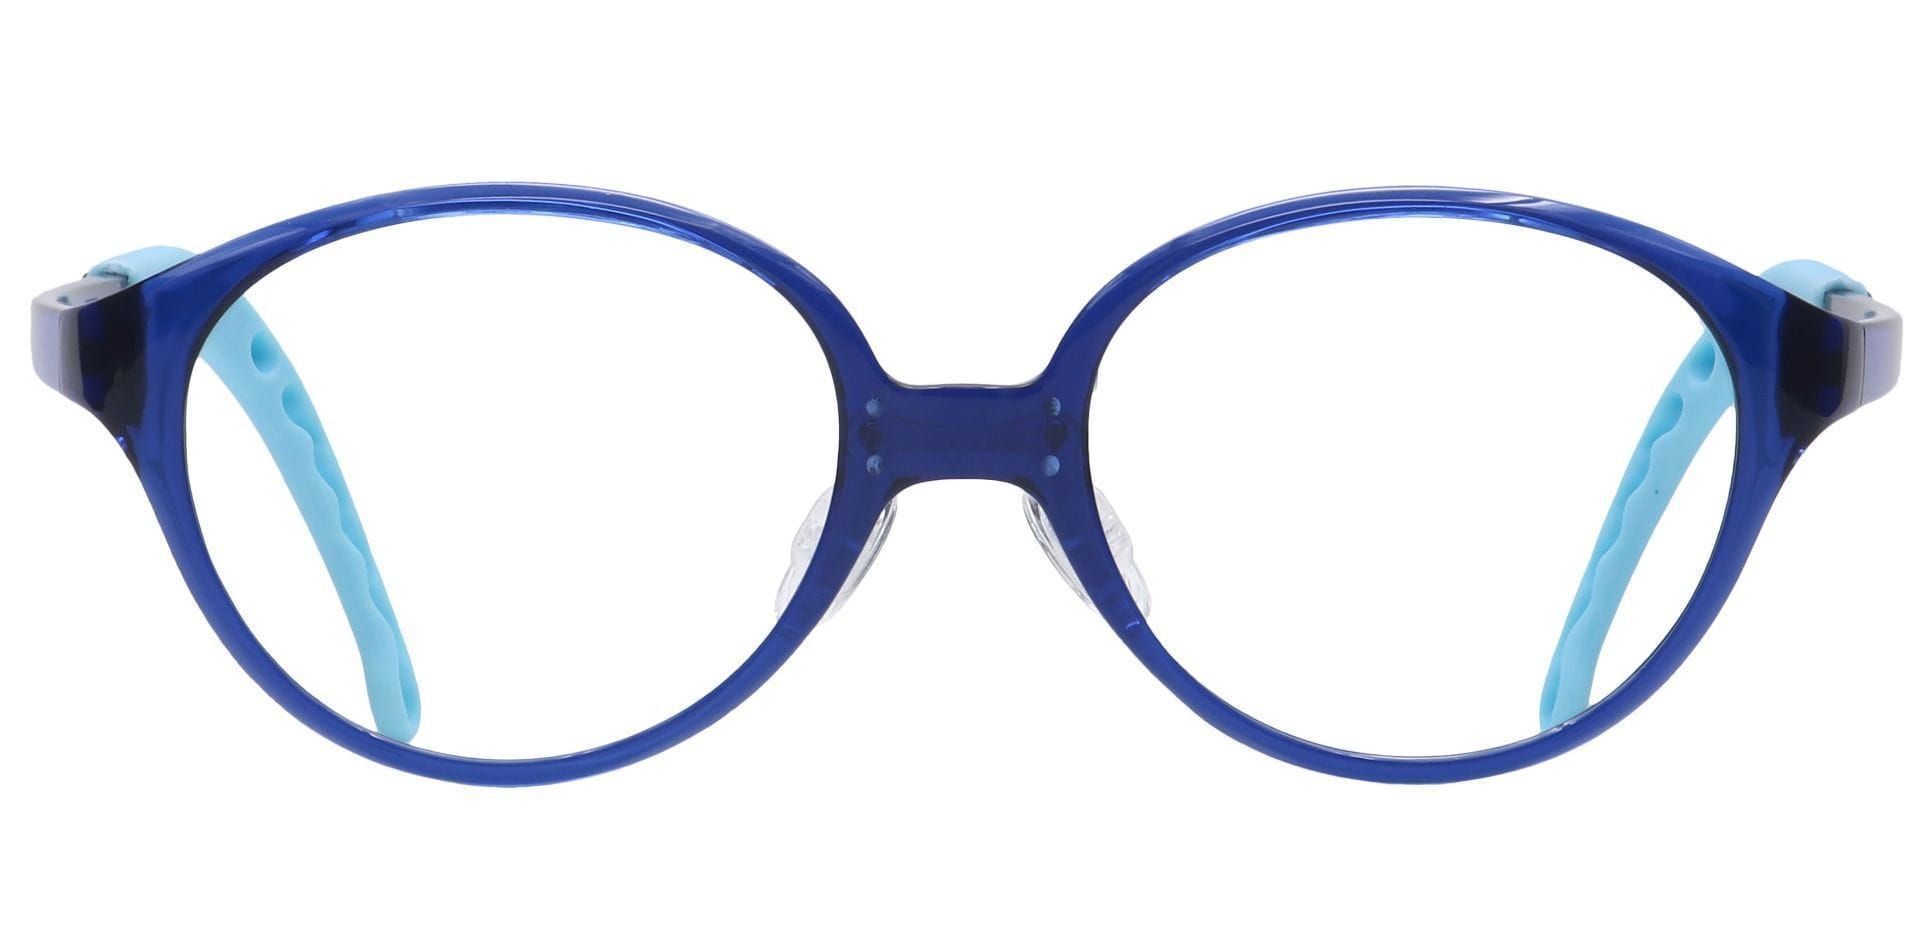 Zany Oval Lined Bifocal Glasses - Navy/turquoise